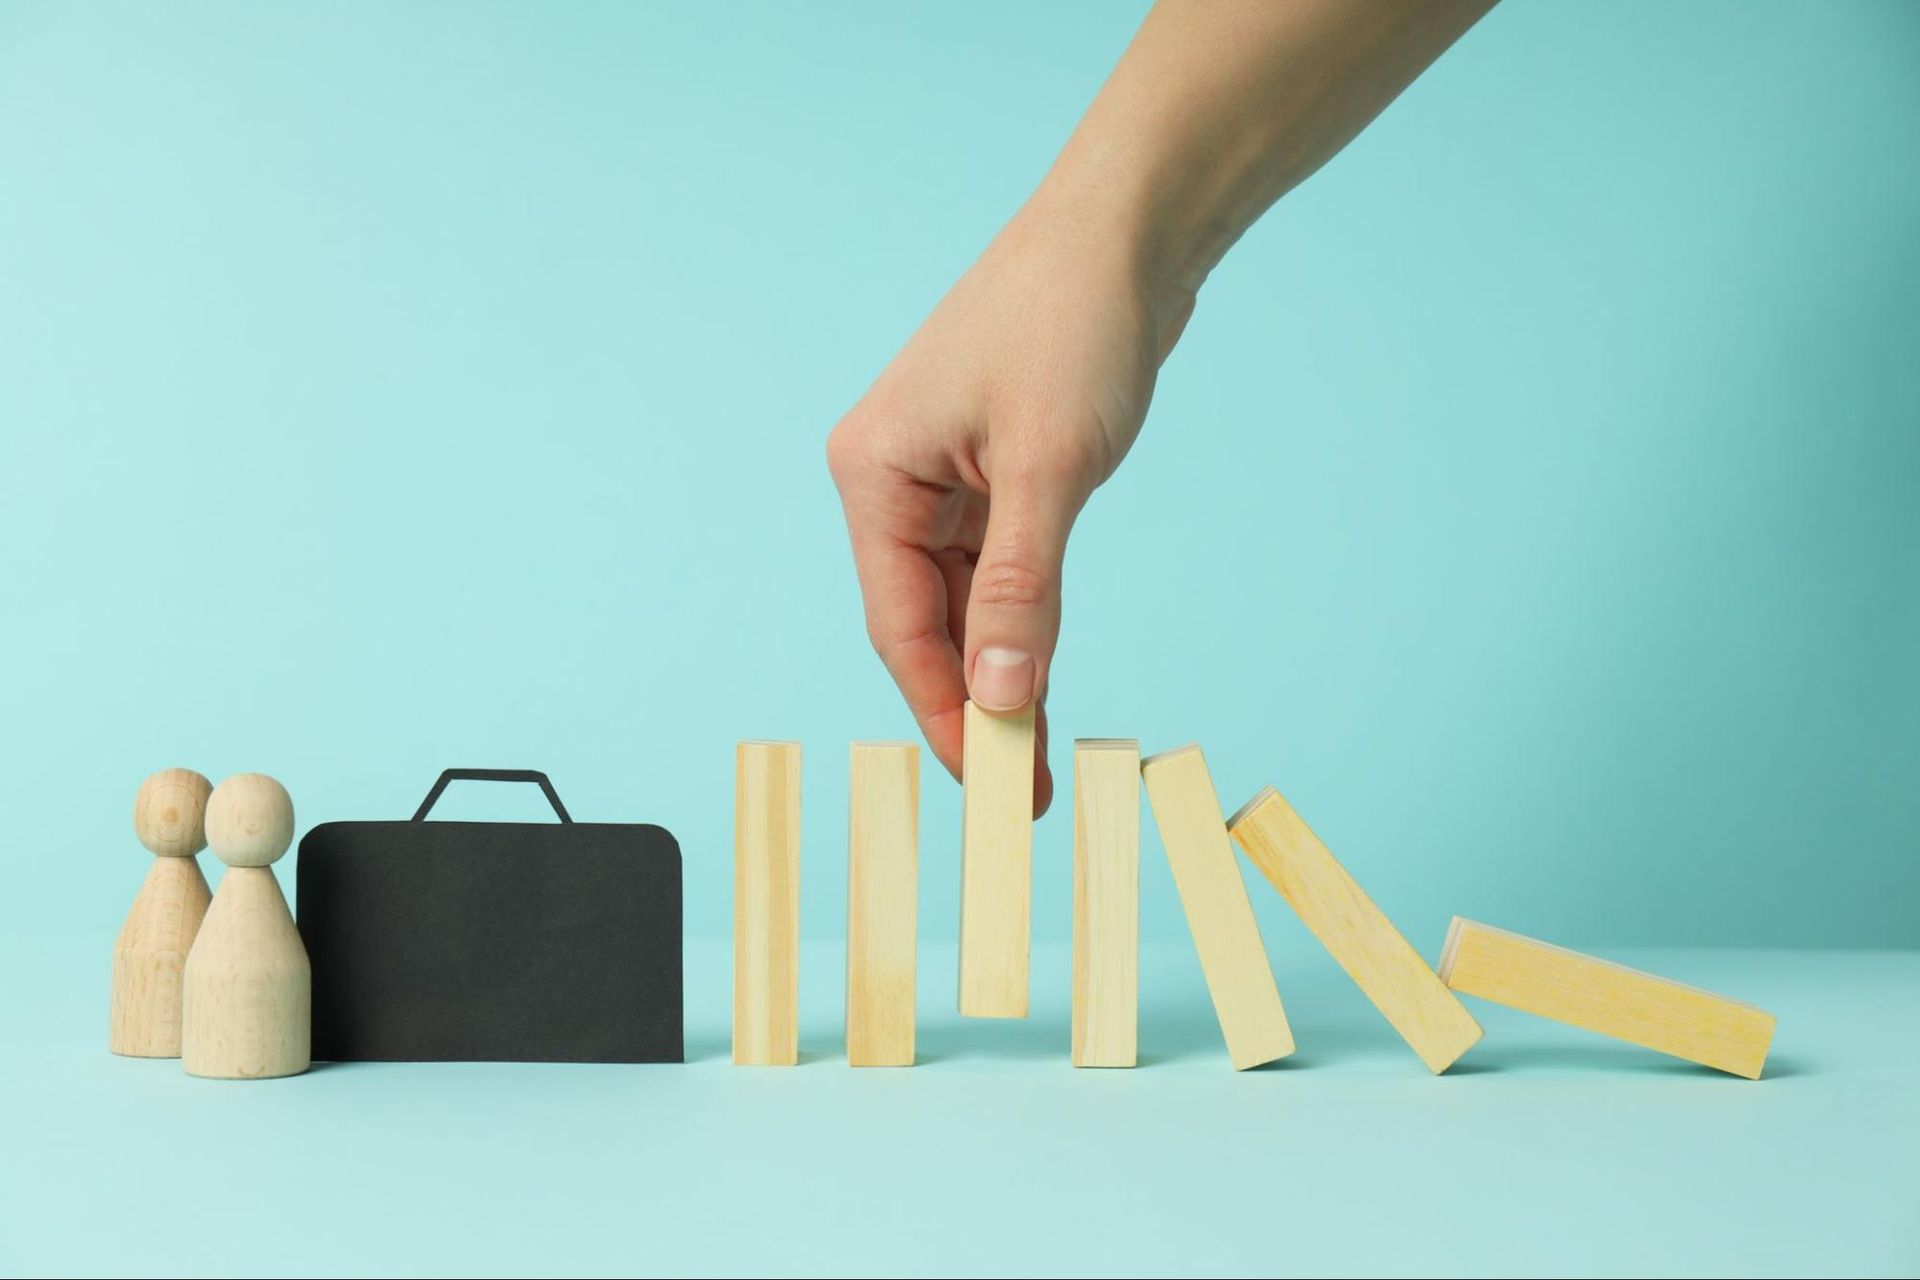 Blocks tumbling to one side towards a briefcase, with a hand holding barrier block in place.